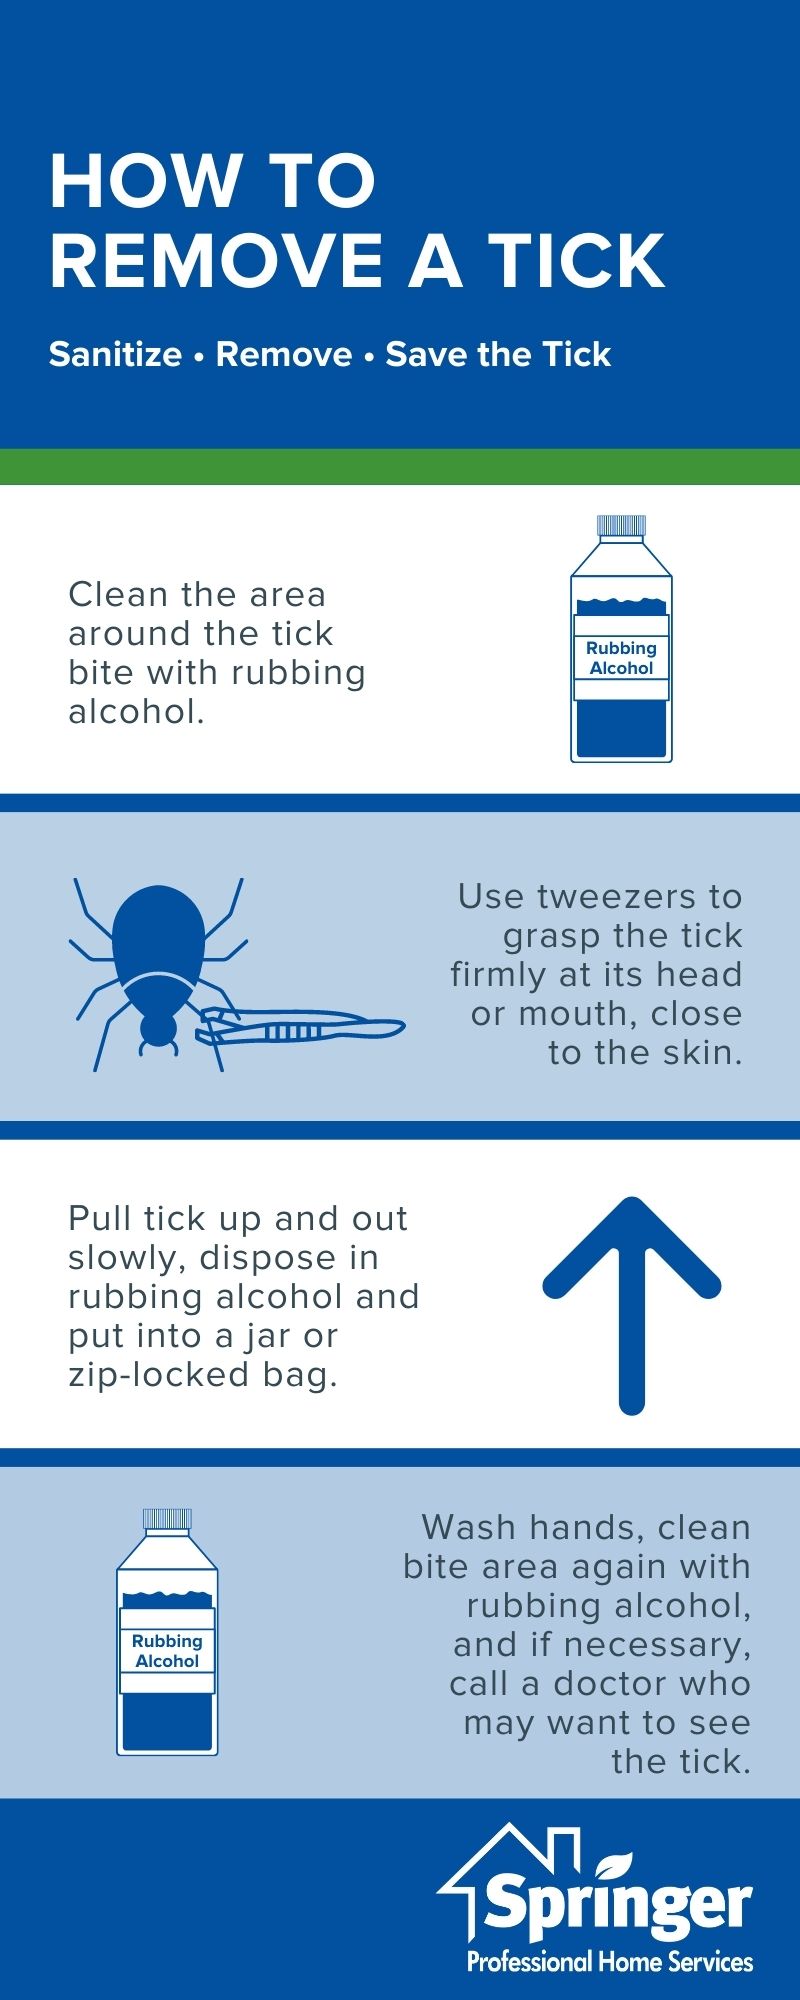 Tick removal guide - Springer Professional Home Services in Iowa